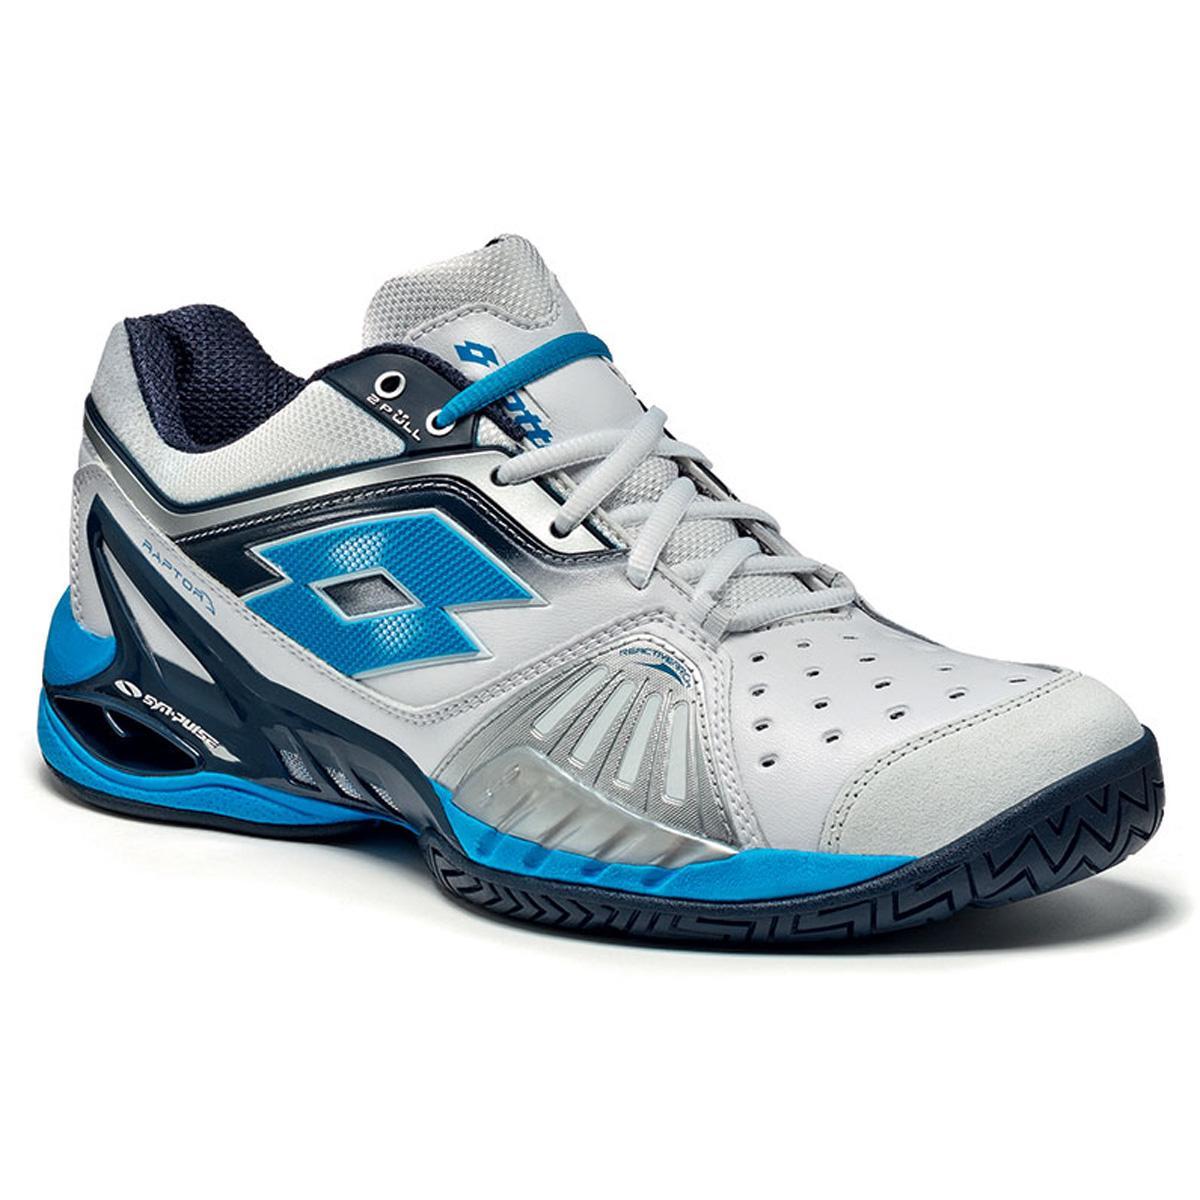 Lotto Mens Raptor Ultra IV Speed Tennis Shoes - White/Blue ...